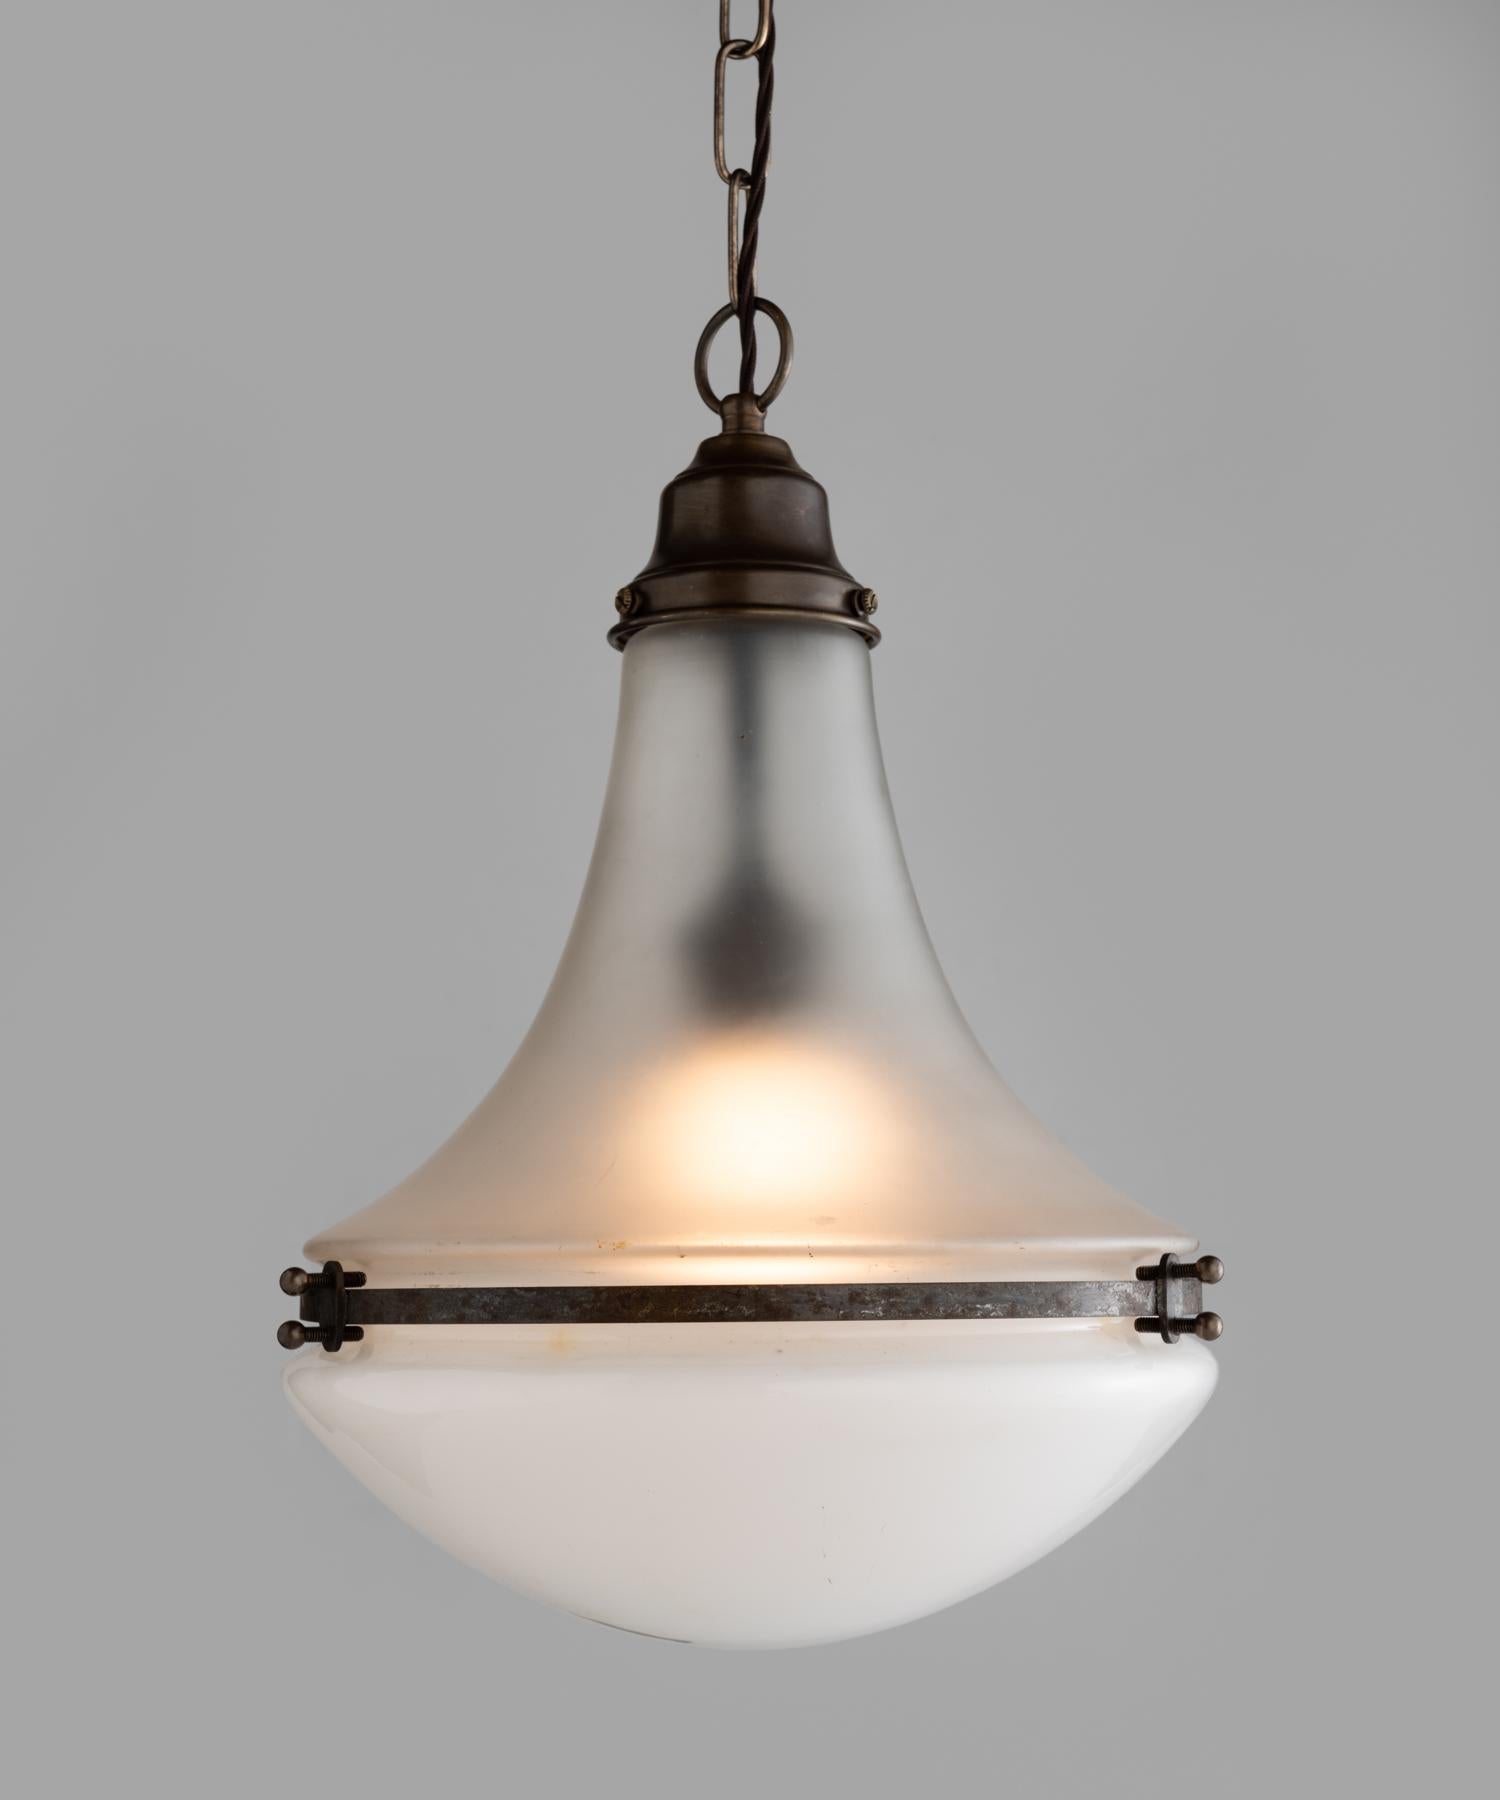 Unique Luzette Pendant by Peter Behrens, Germany, circa 1930.

With contrasting top and bottom shades, brass hardware and beautiful patina. Drop is adjustable.

9